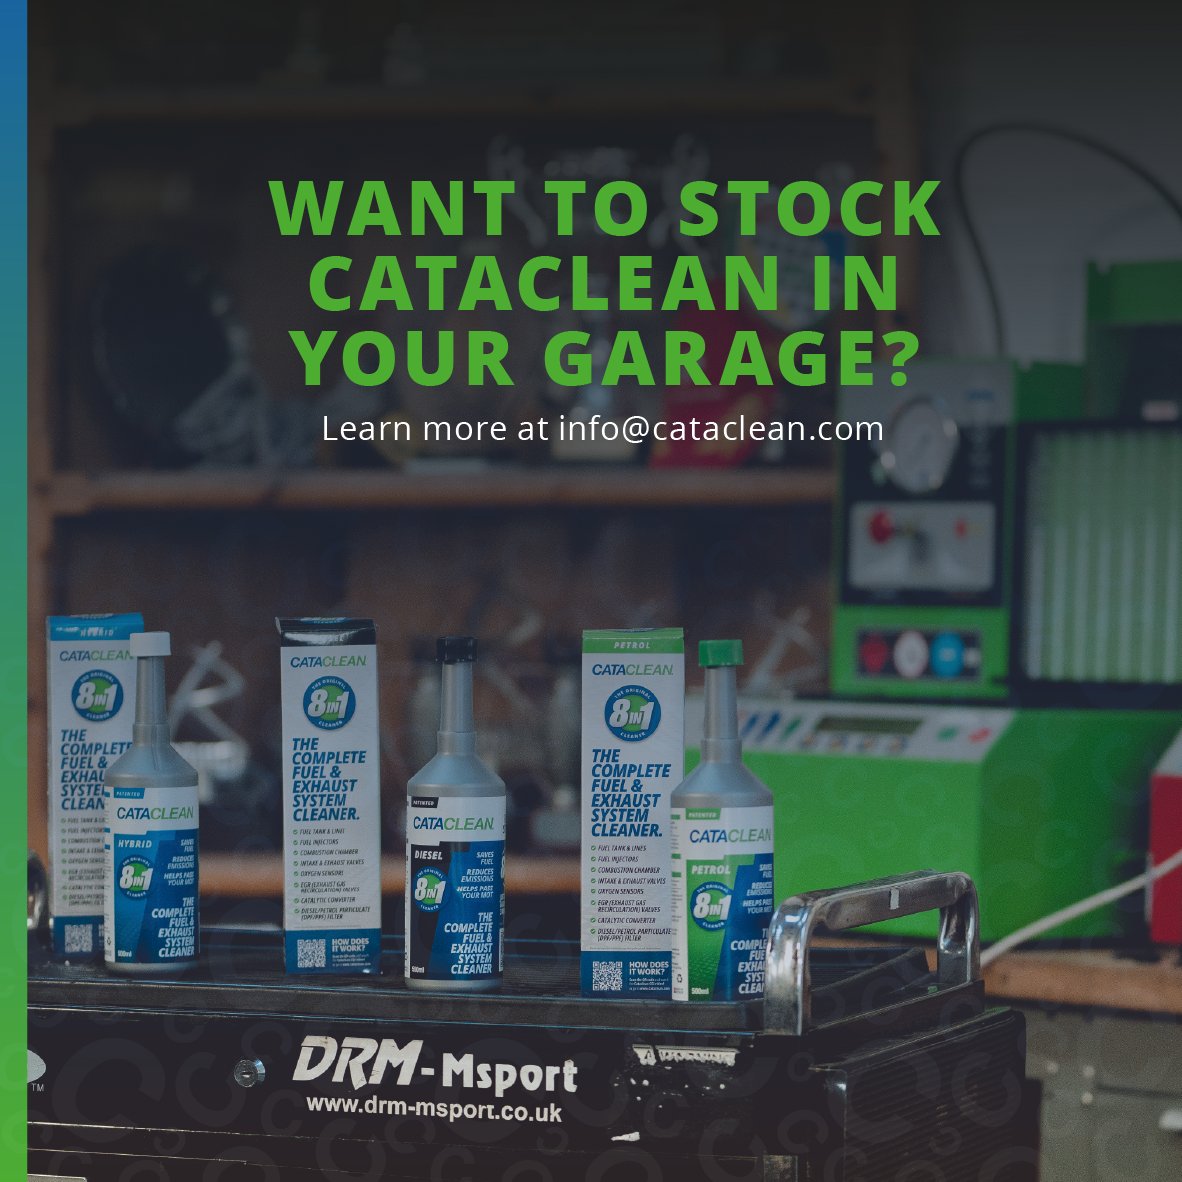 Want to stock Cataclean in your garage? Contact us at info@cataclean.com to learn more about becoming a distributor today. #garage #stock #stockist #sell #Cataclean #EngineCleaning #FuelAdditive #emissions #MPG #enginesystem #catalyticconverter #fueladditive